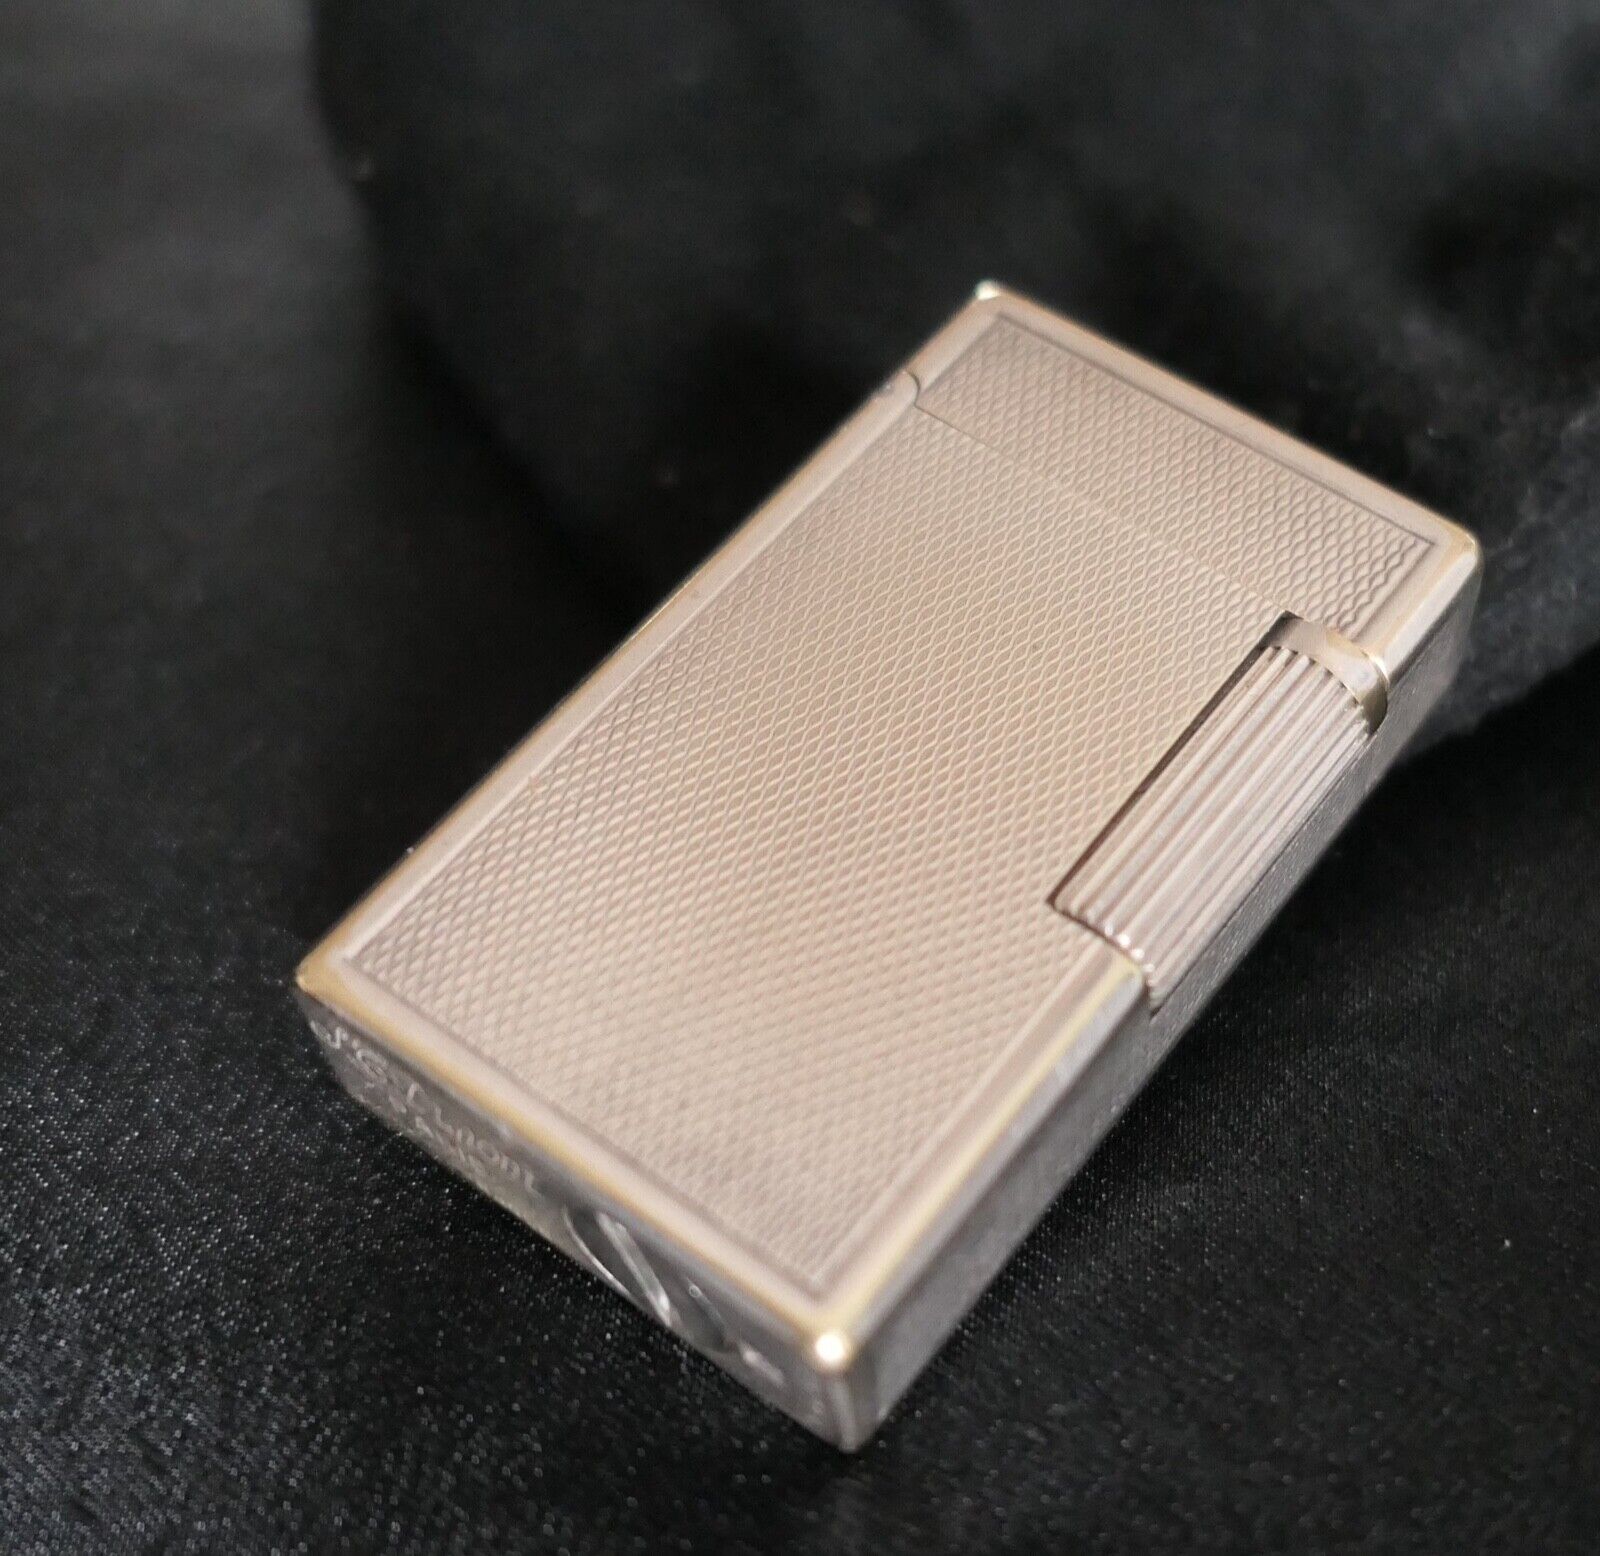 ST Dupont Model D 57 Silver Lighter No. G 3234 TB Lighter Collector Condition